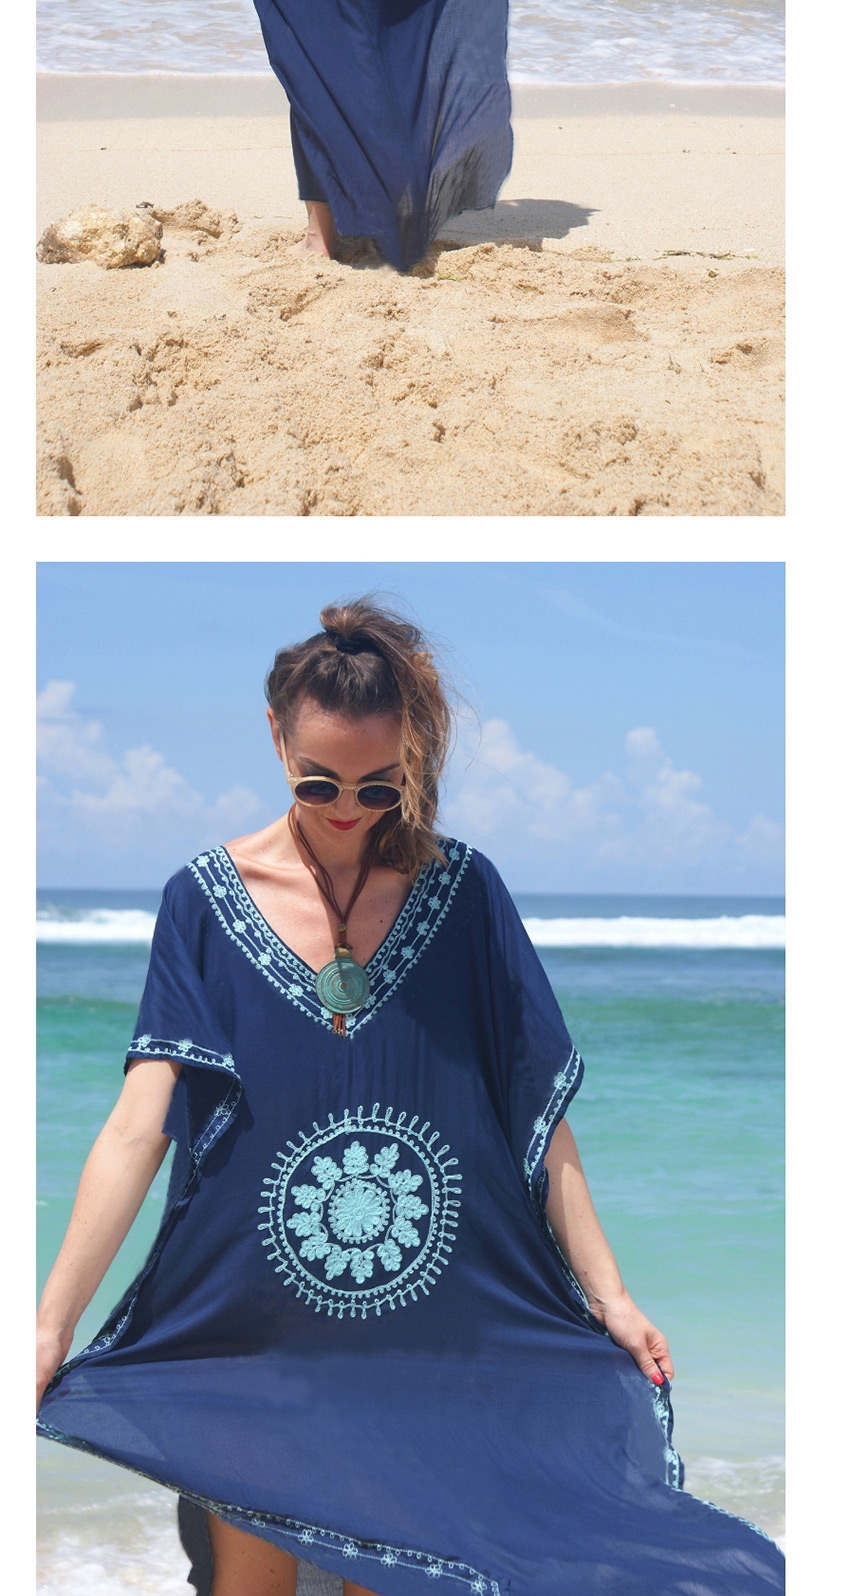 Fashion Black Embroidery Nylon Embroidered Loose Large Plus Size Sunscreen Clothing,Sunscreen Shirts